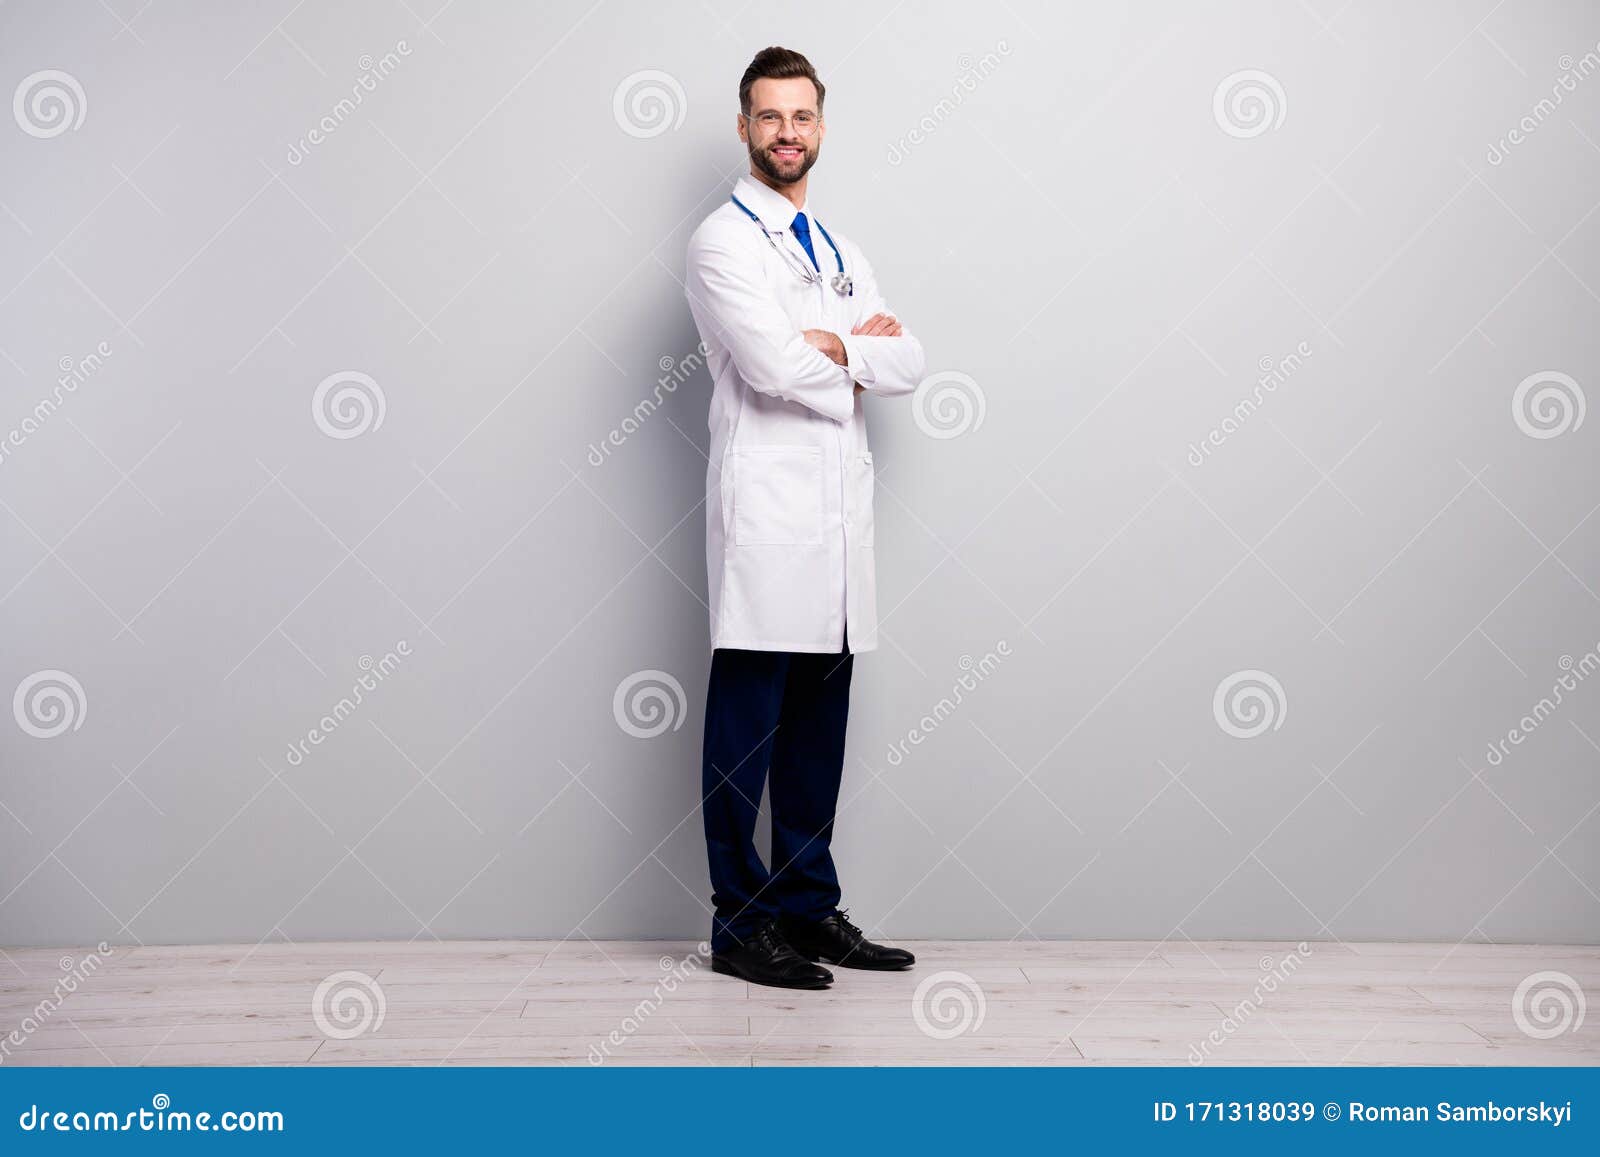 full length body size profile side half-turned view of nice attractive cheerful content doc first aid medicare medico